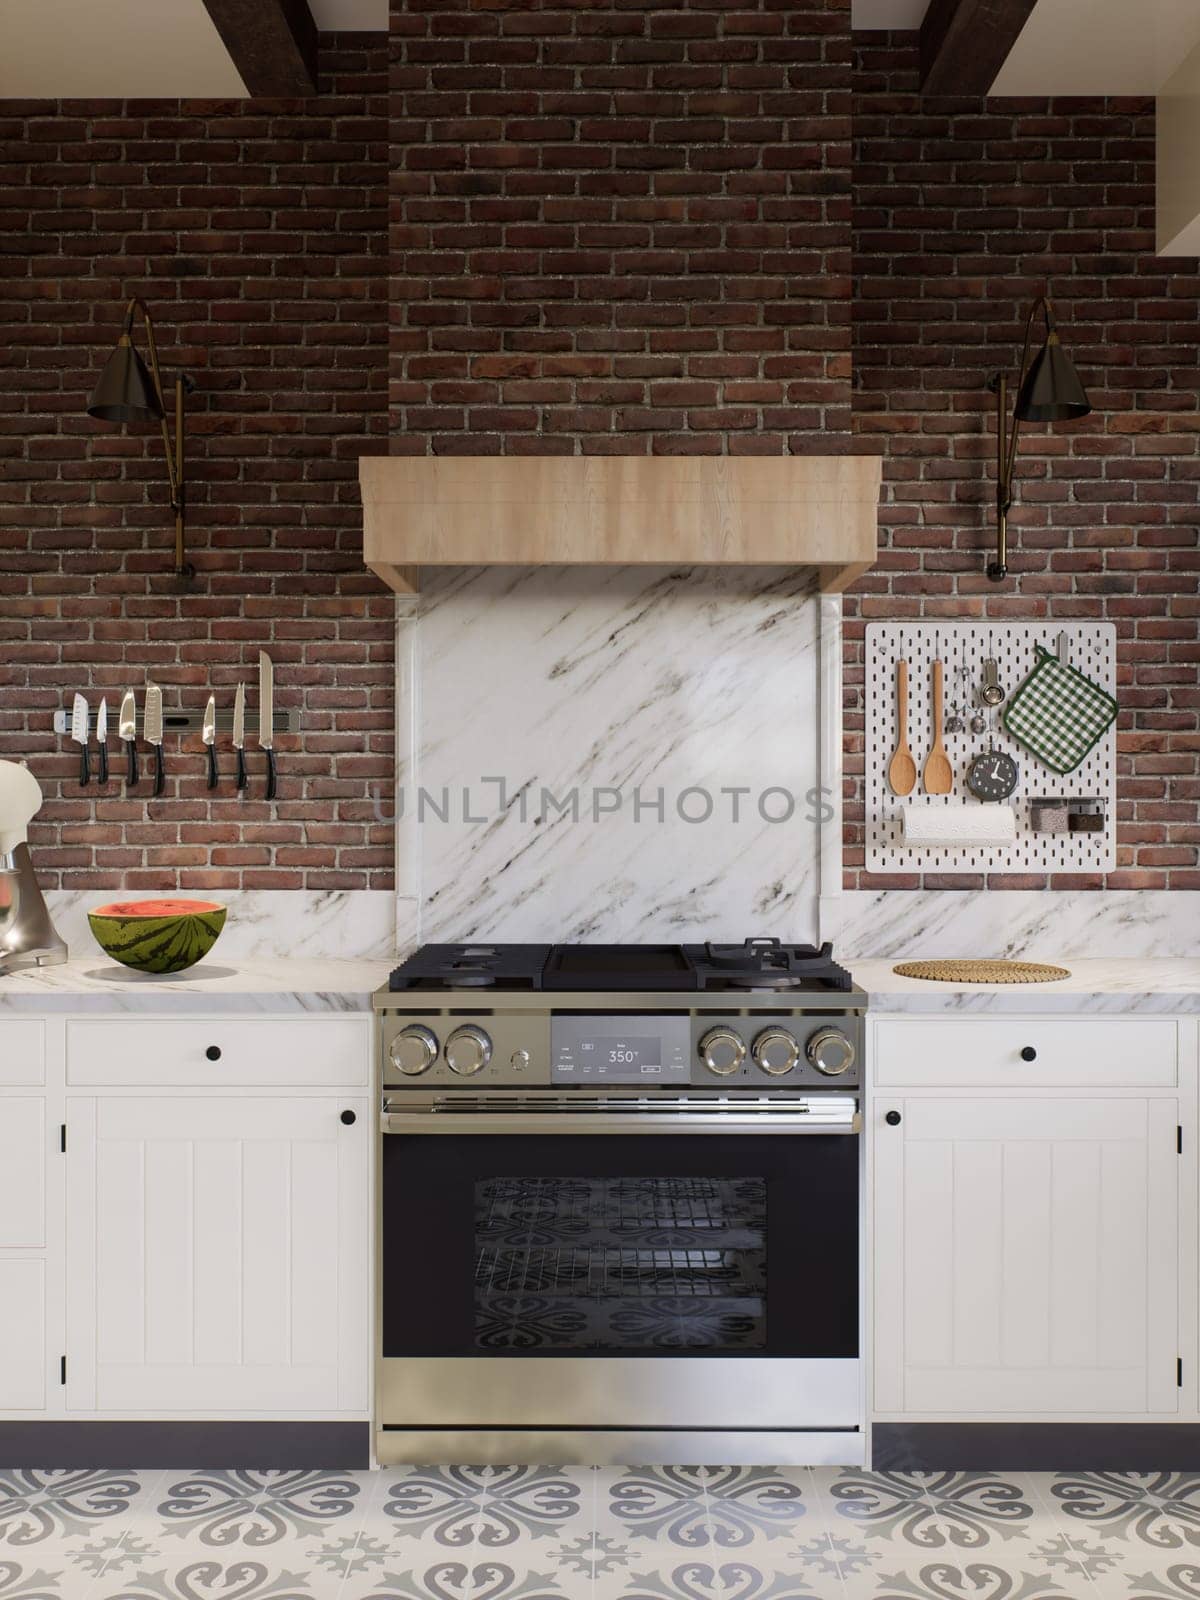 White kitchen with dark red brick, wood, and kitchen utensils. L-shaped kitchen with beams focusing on the stove with hood. 3d rendering